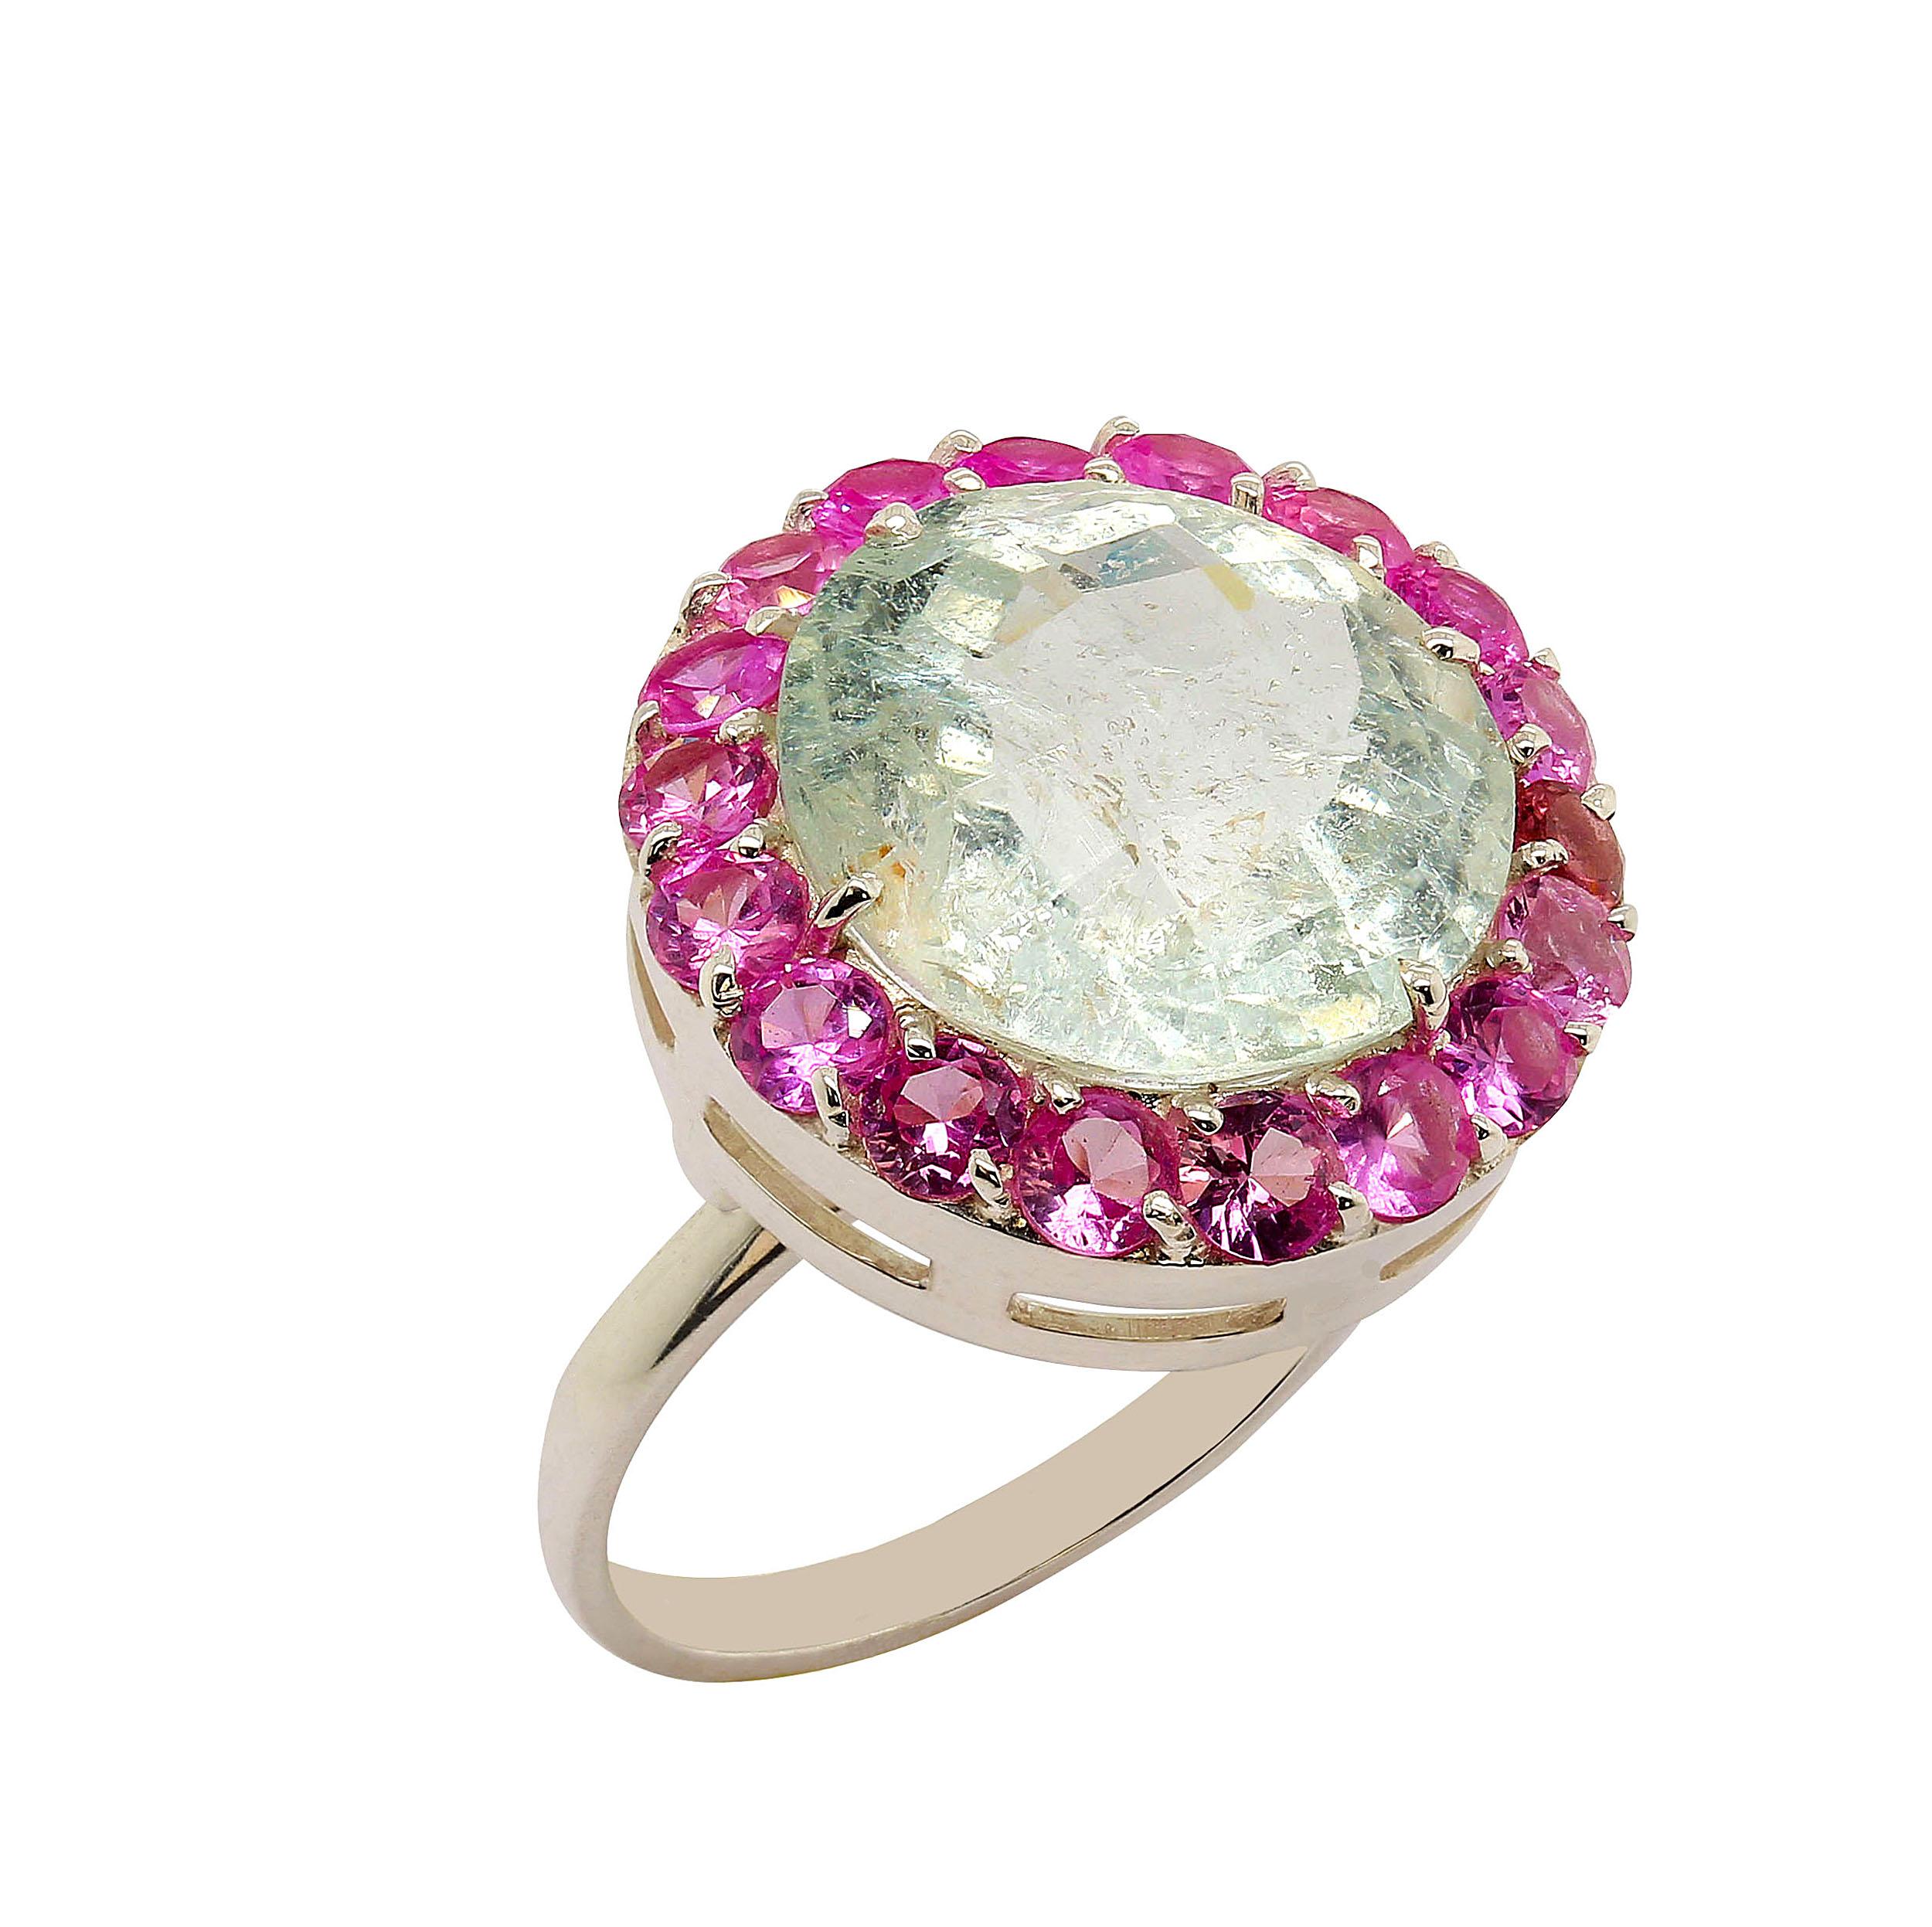 Pink and Green is the perfect color conbination especially when it's Pink Sapphire surrounding Green Beryl. This lovely round Green Beryl has a checkerboard table and lots of inclusions to reflect the light. Hot Pink Sapphires set off the cooler